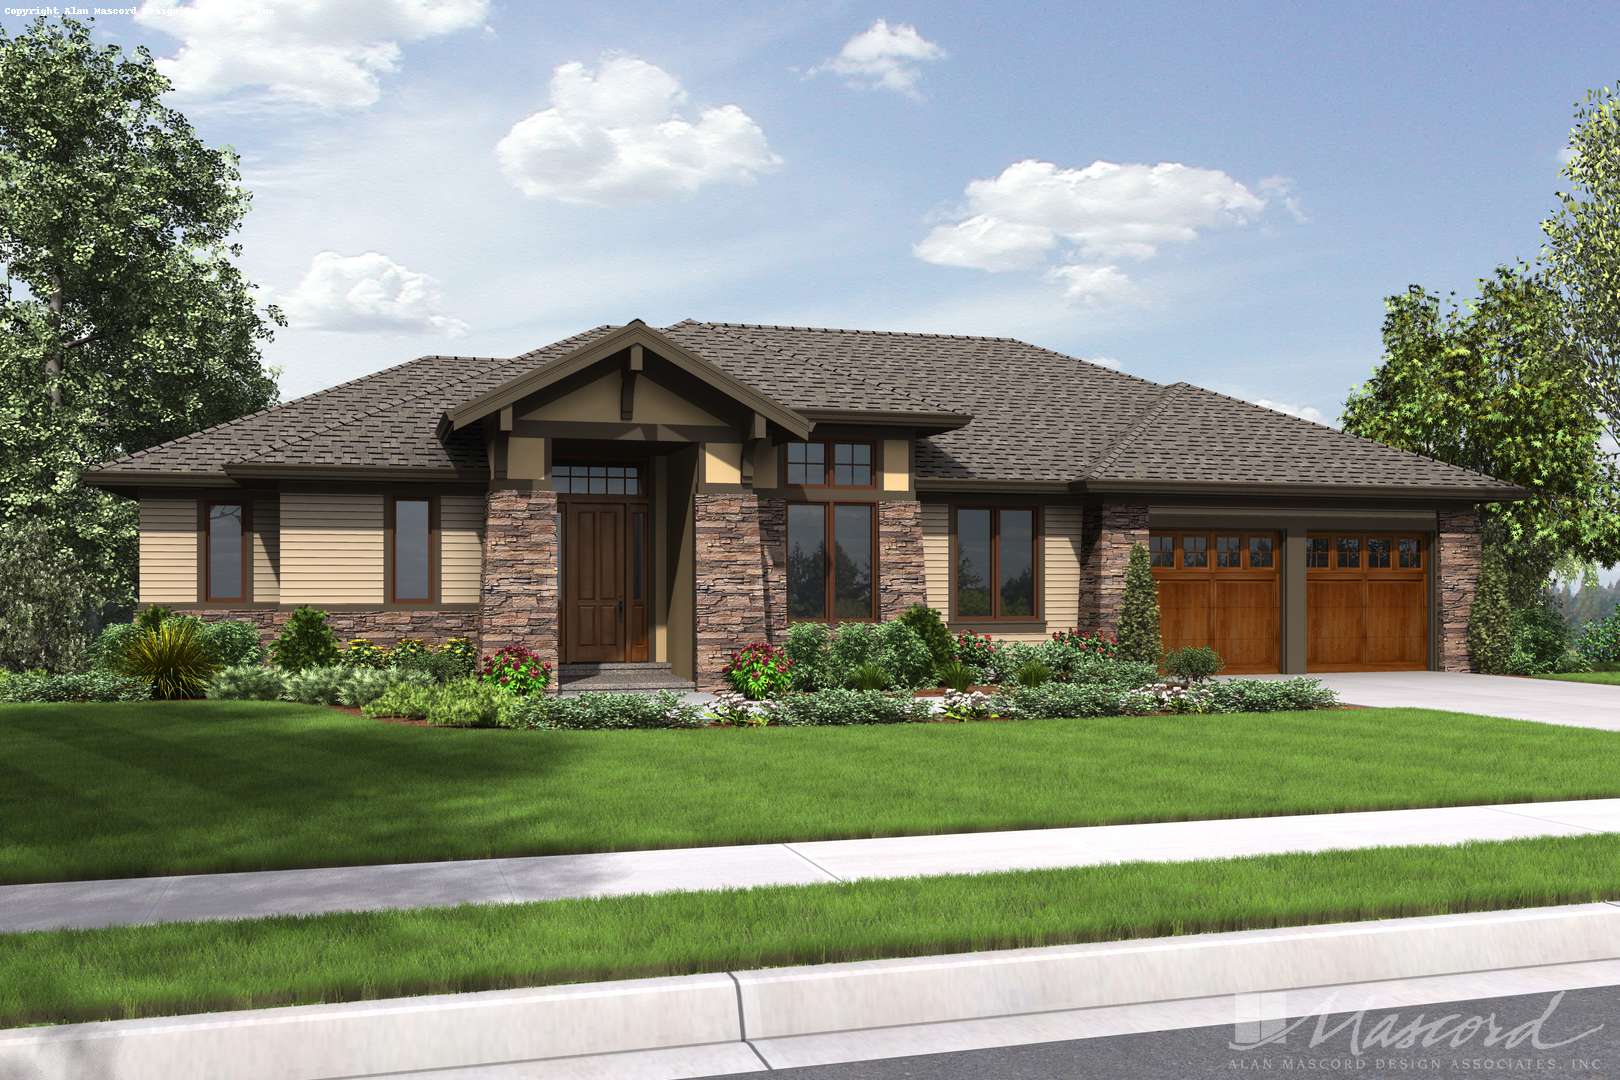 Contemporary House Plan 1339 The Briarwood 2694 Sqft 3 Beds 3 1